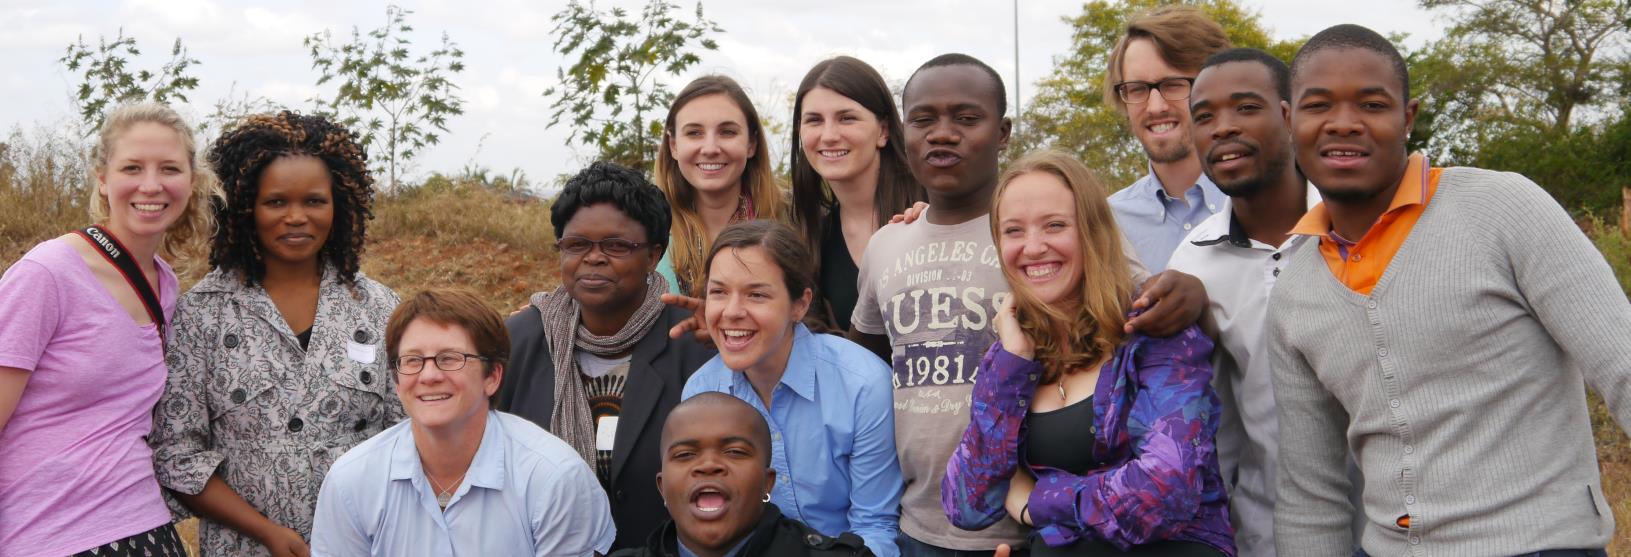 2014 CHIL and Univen Students in South Africa